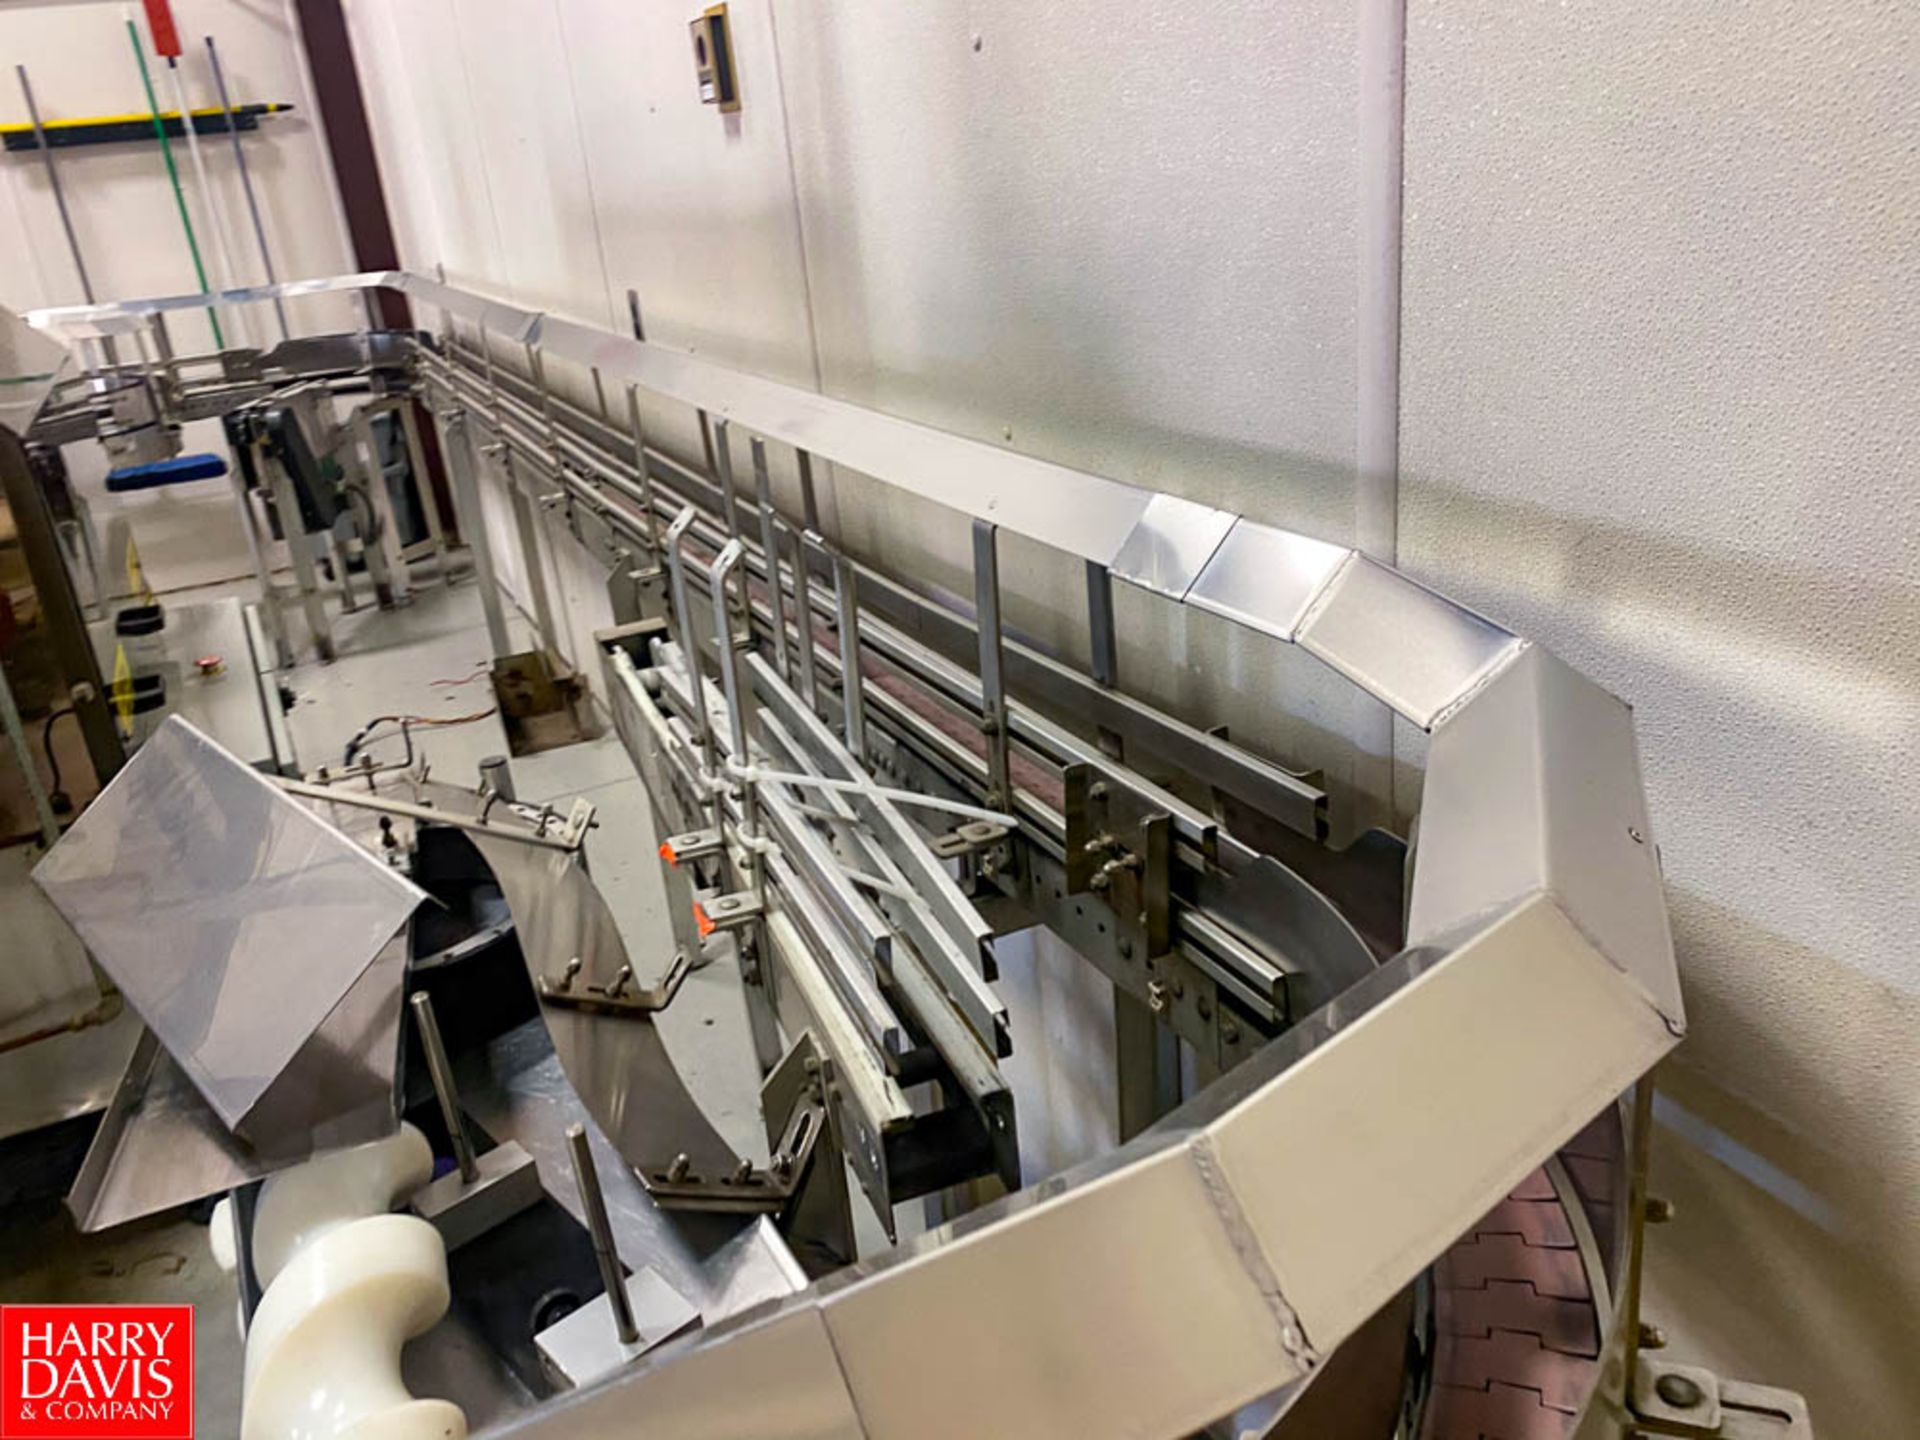 S/S Product Conveyor 7""wx20'L - Rigging Fee: $ 350 - Image 2 of 3